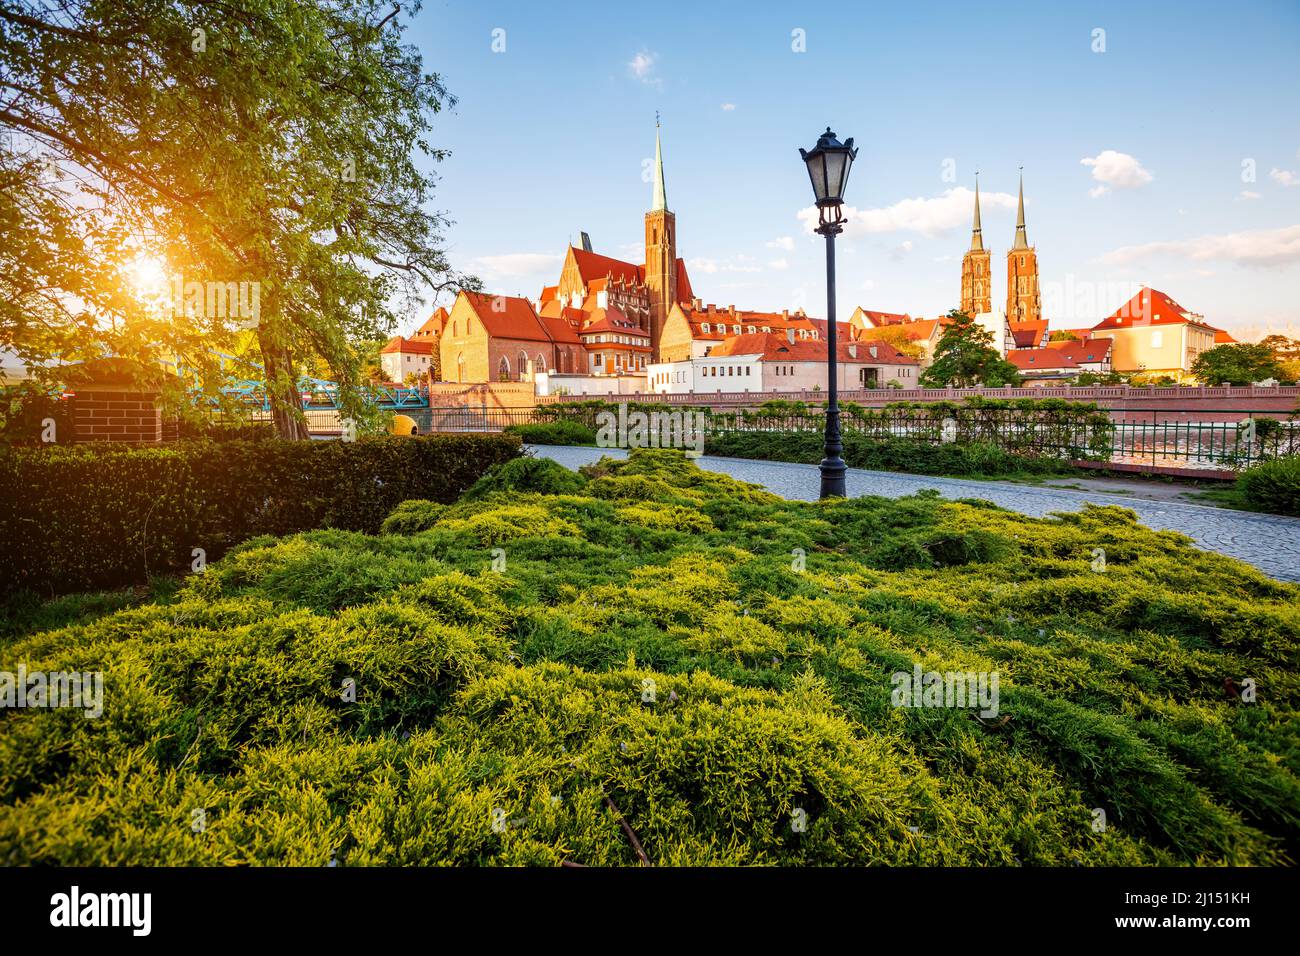 View of the ancient city Wroclaw. Picturesque scene. Location famous place Cathedral of St. John the Baptist Tumski island, Odra river, Poland, Europe Stock Photo